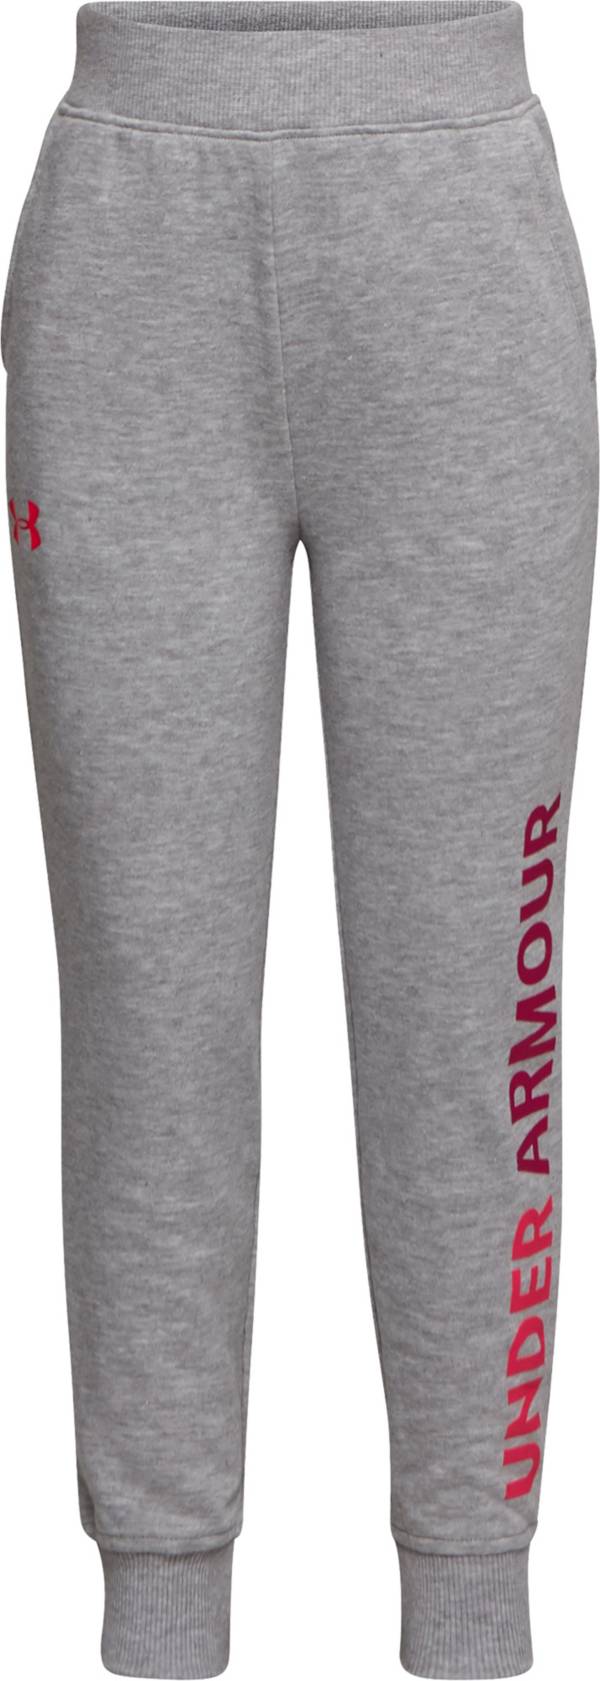 Under Armour Little Girls' Fearless Jogger Pants product image